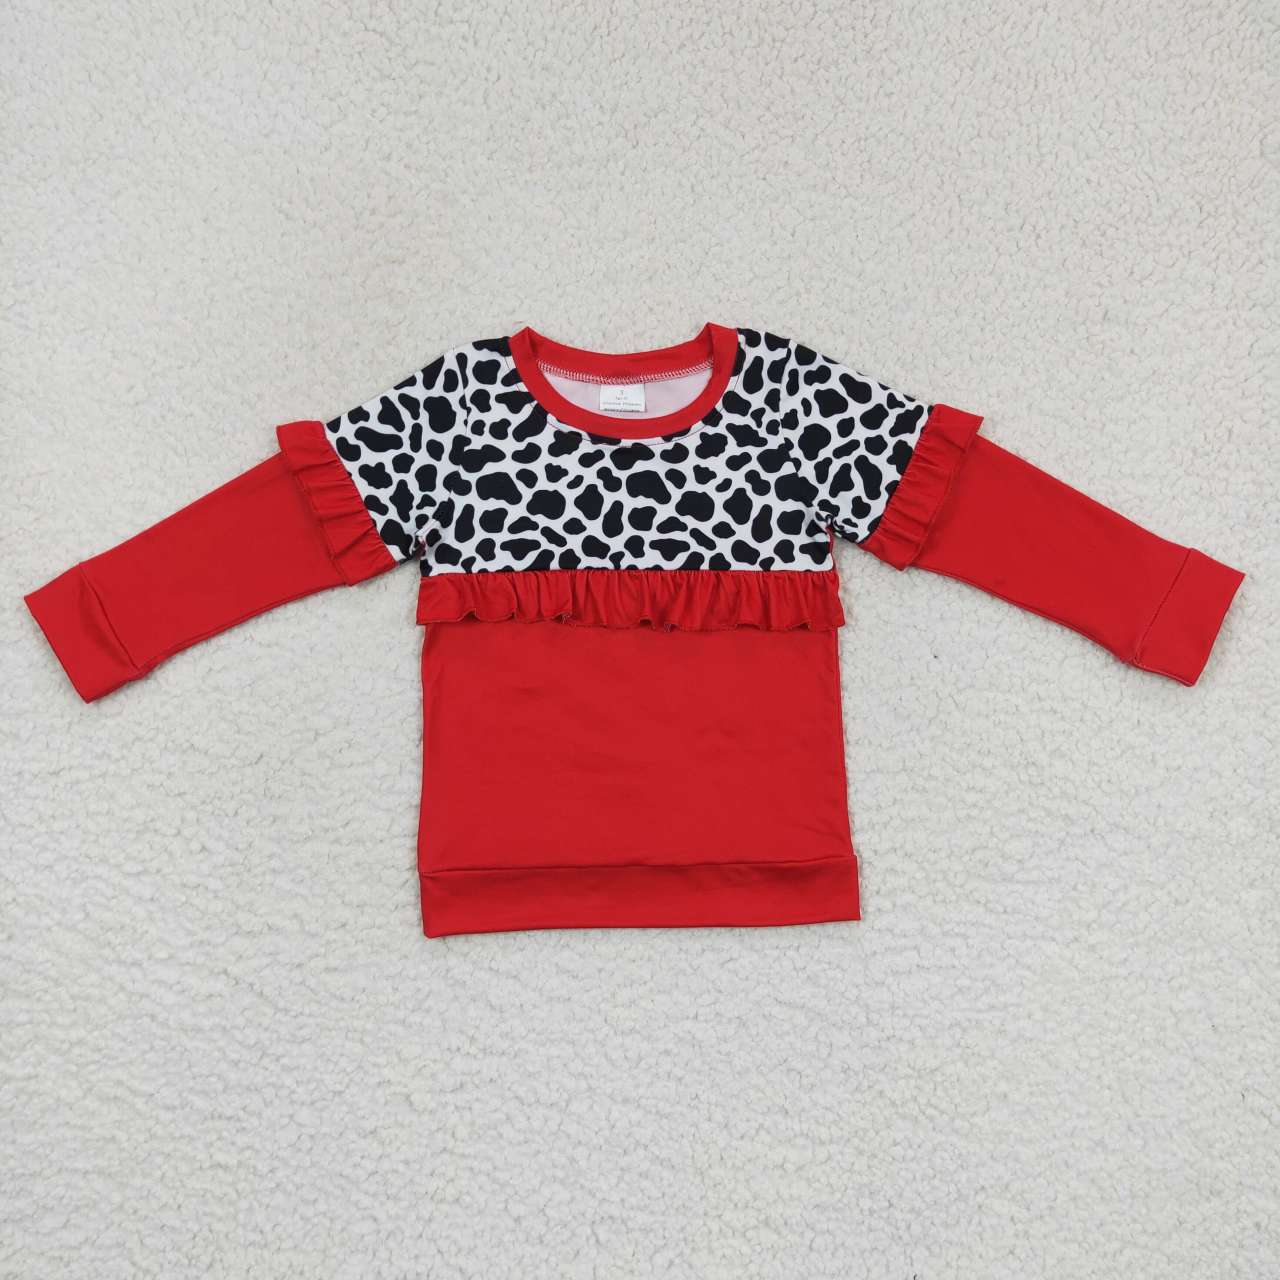 GT0295 kids clothes girls girl winter top leopard red girl christmas shirt valentines day top